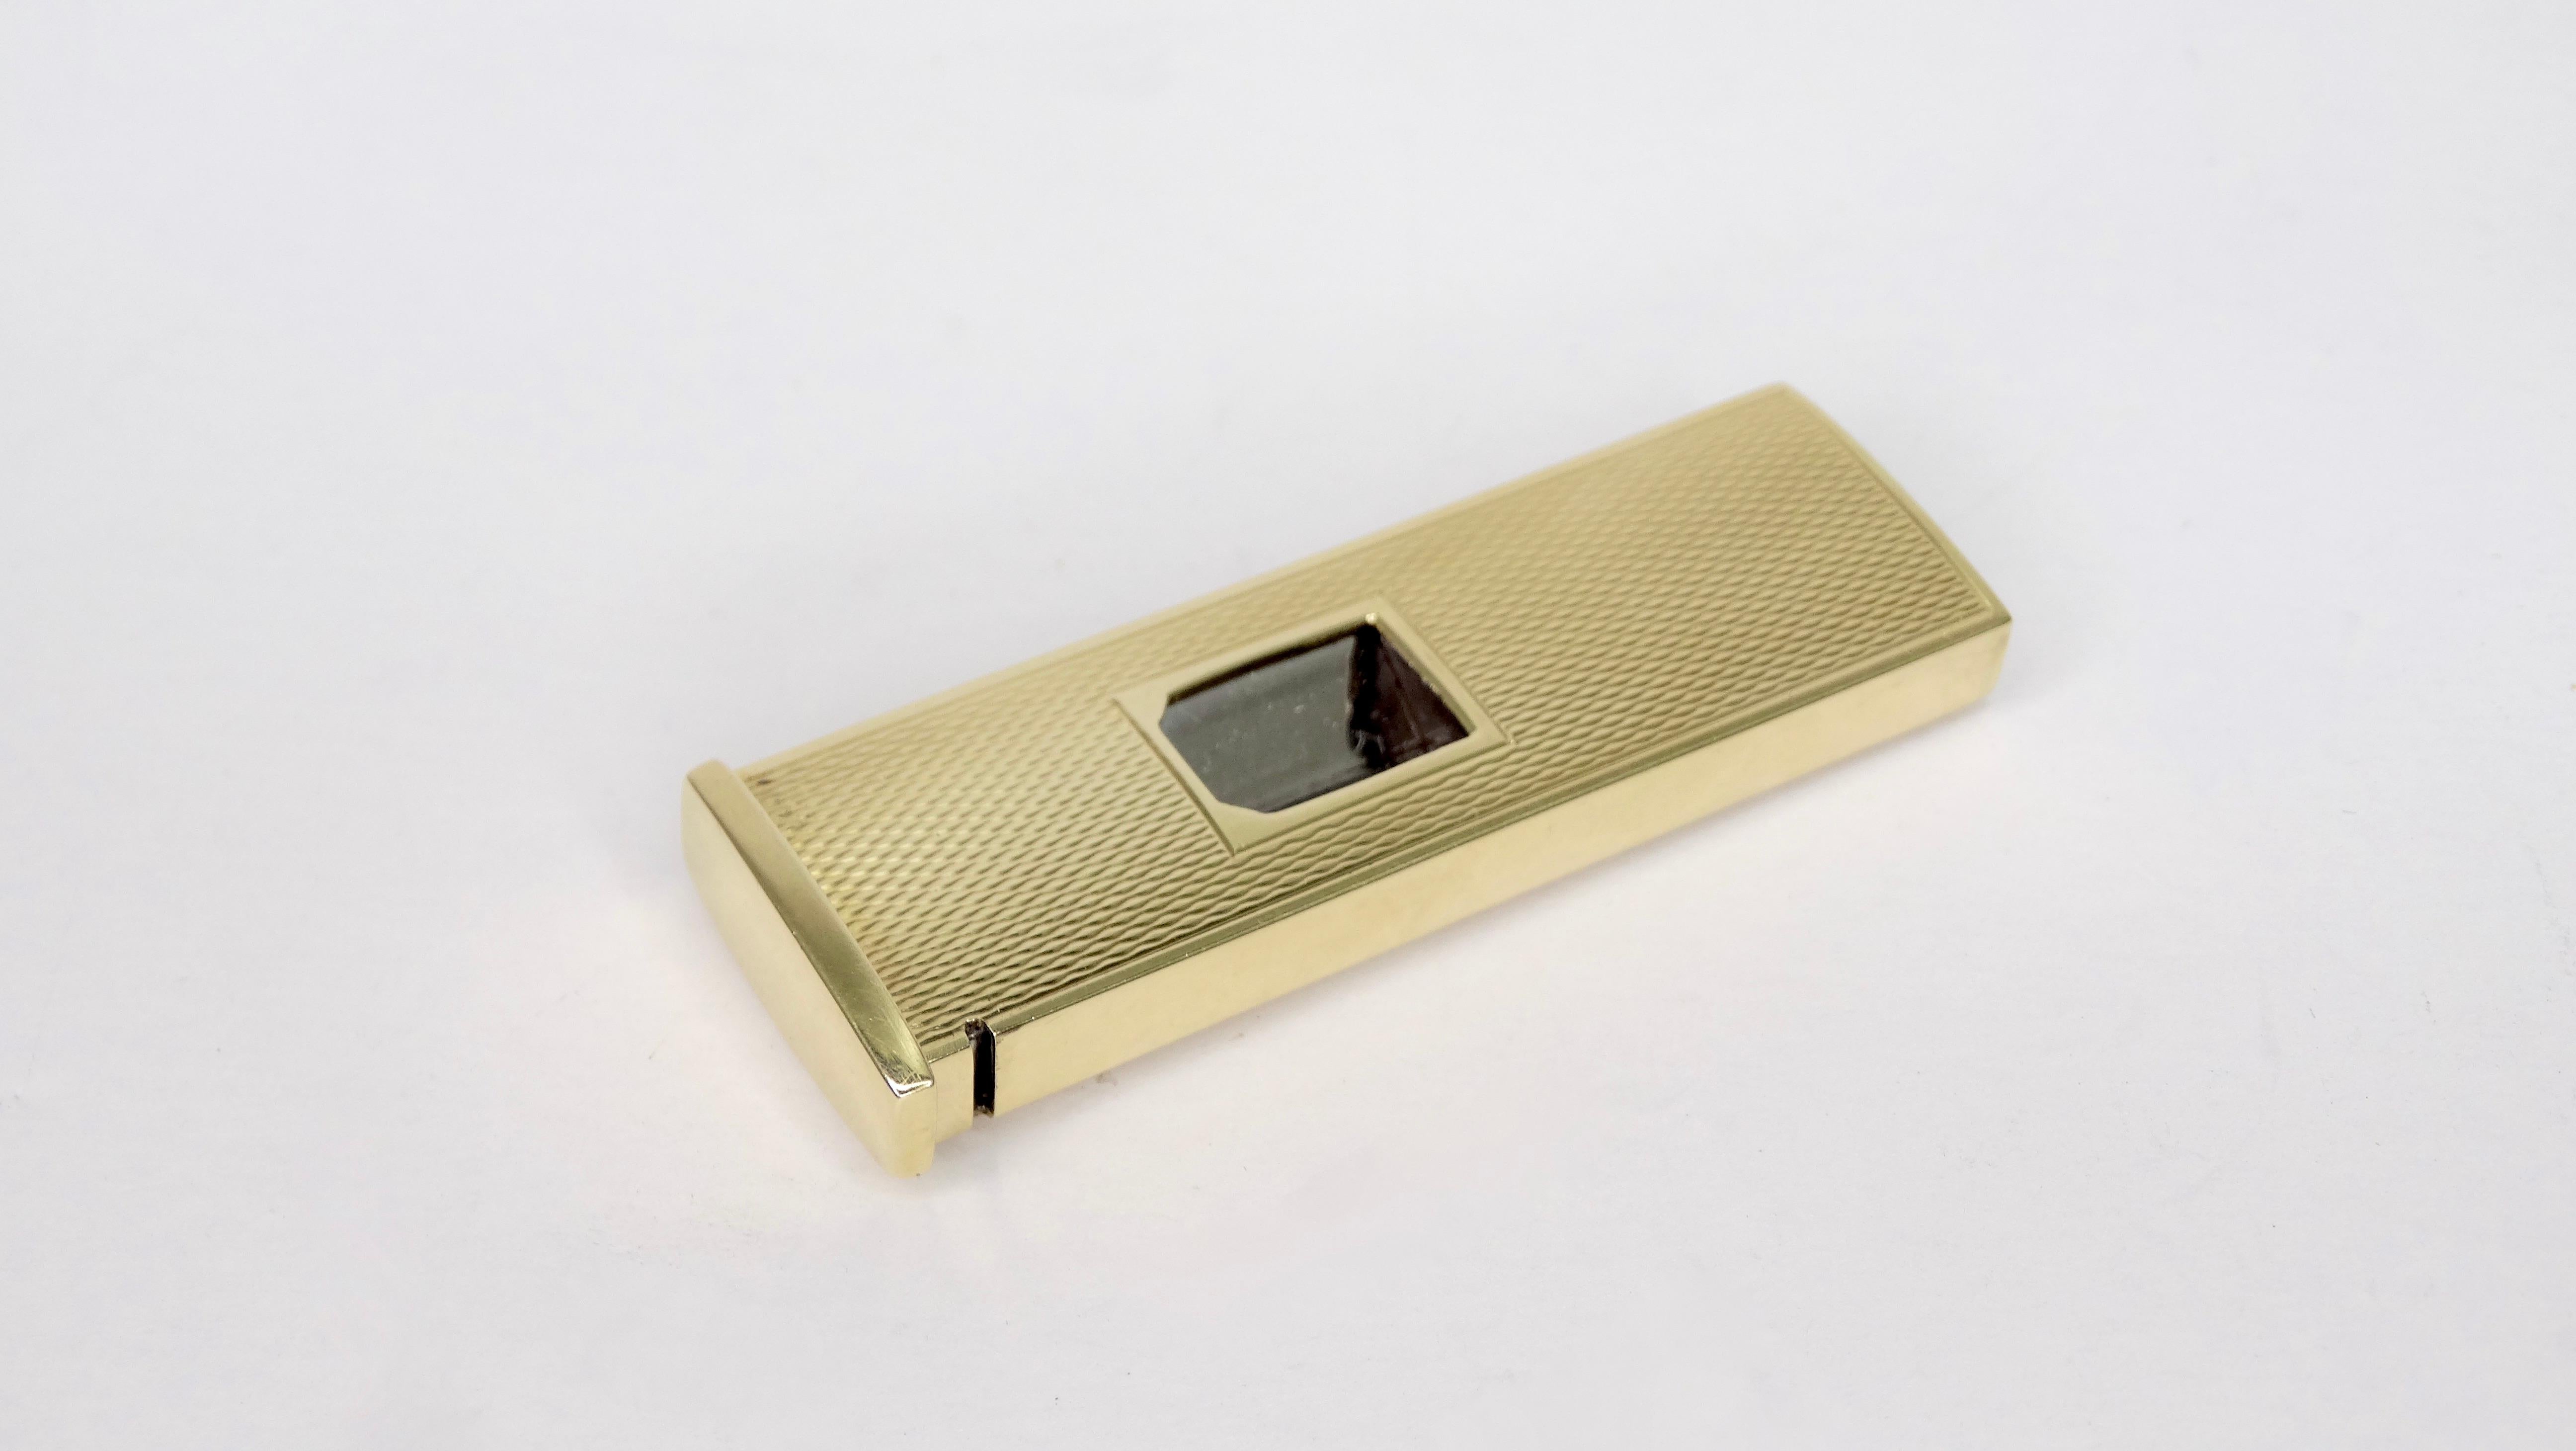 Circa 1950s, this German made Rostfrei Pfeilring Solingen cigar cutter is crafted from 14k gold and features a textured exterior. Easily slides open and closed. Stamped 585 and weighs 19g in total weight. A great novelty gift for yourself or someone